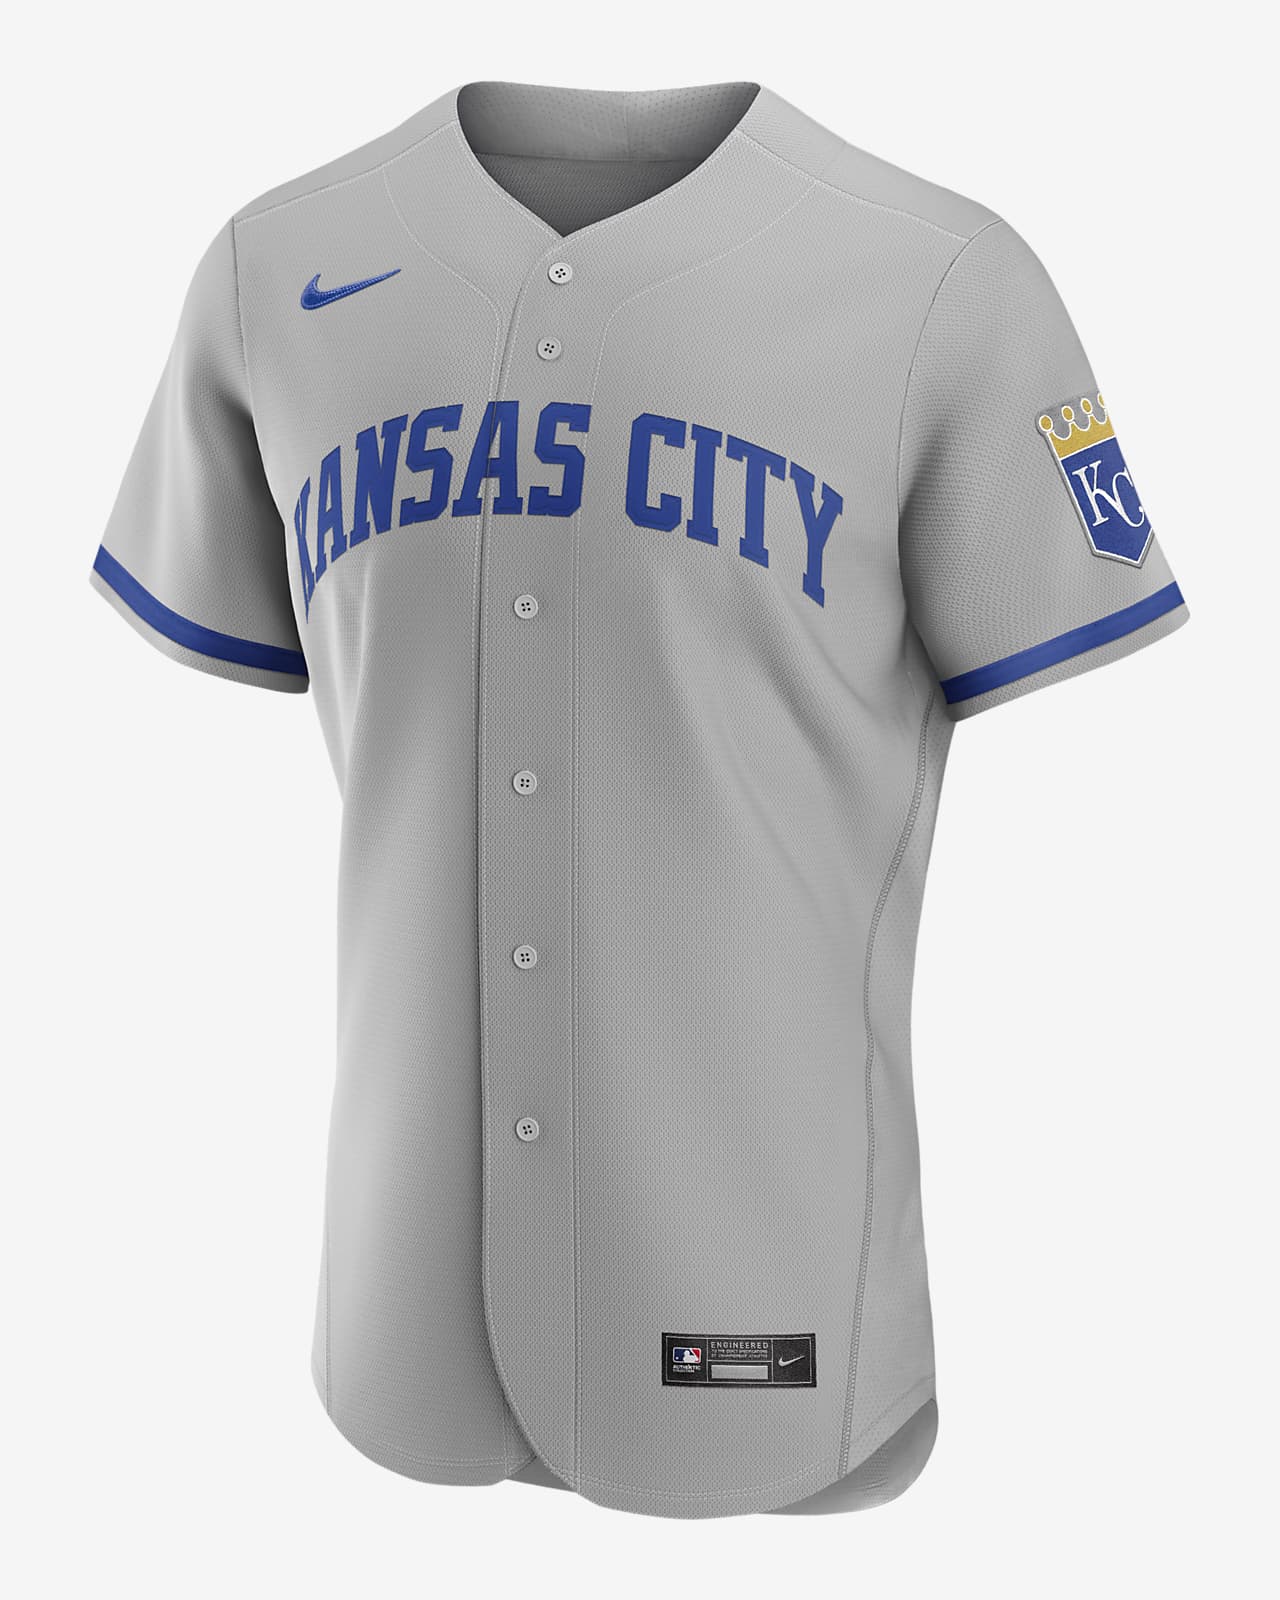 Nike reportedly wants only four jerseys per MLB team  Battery Power